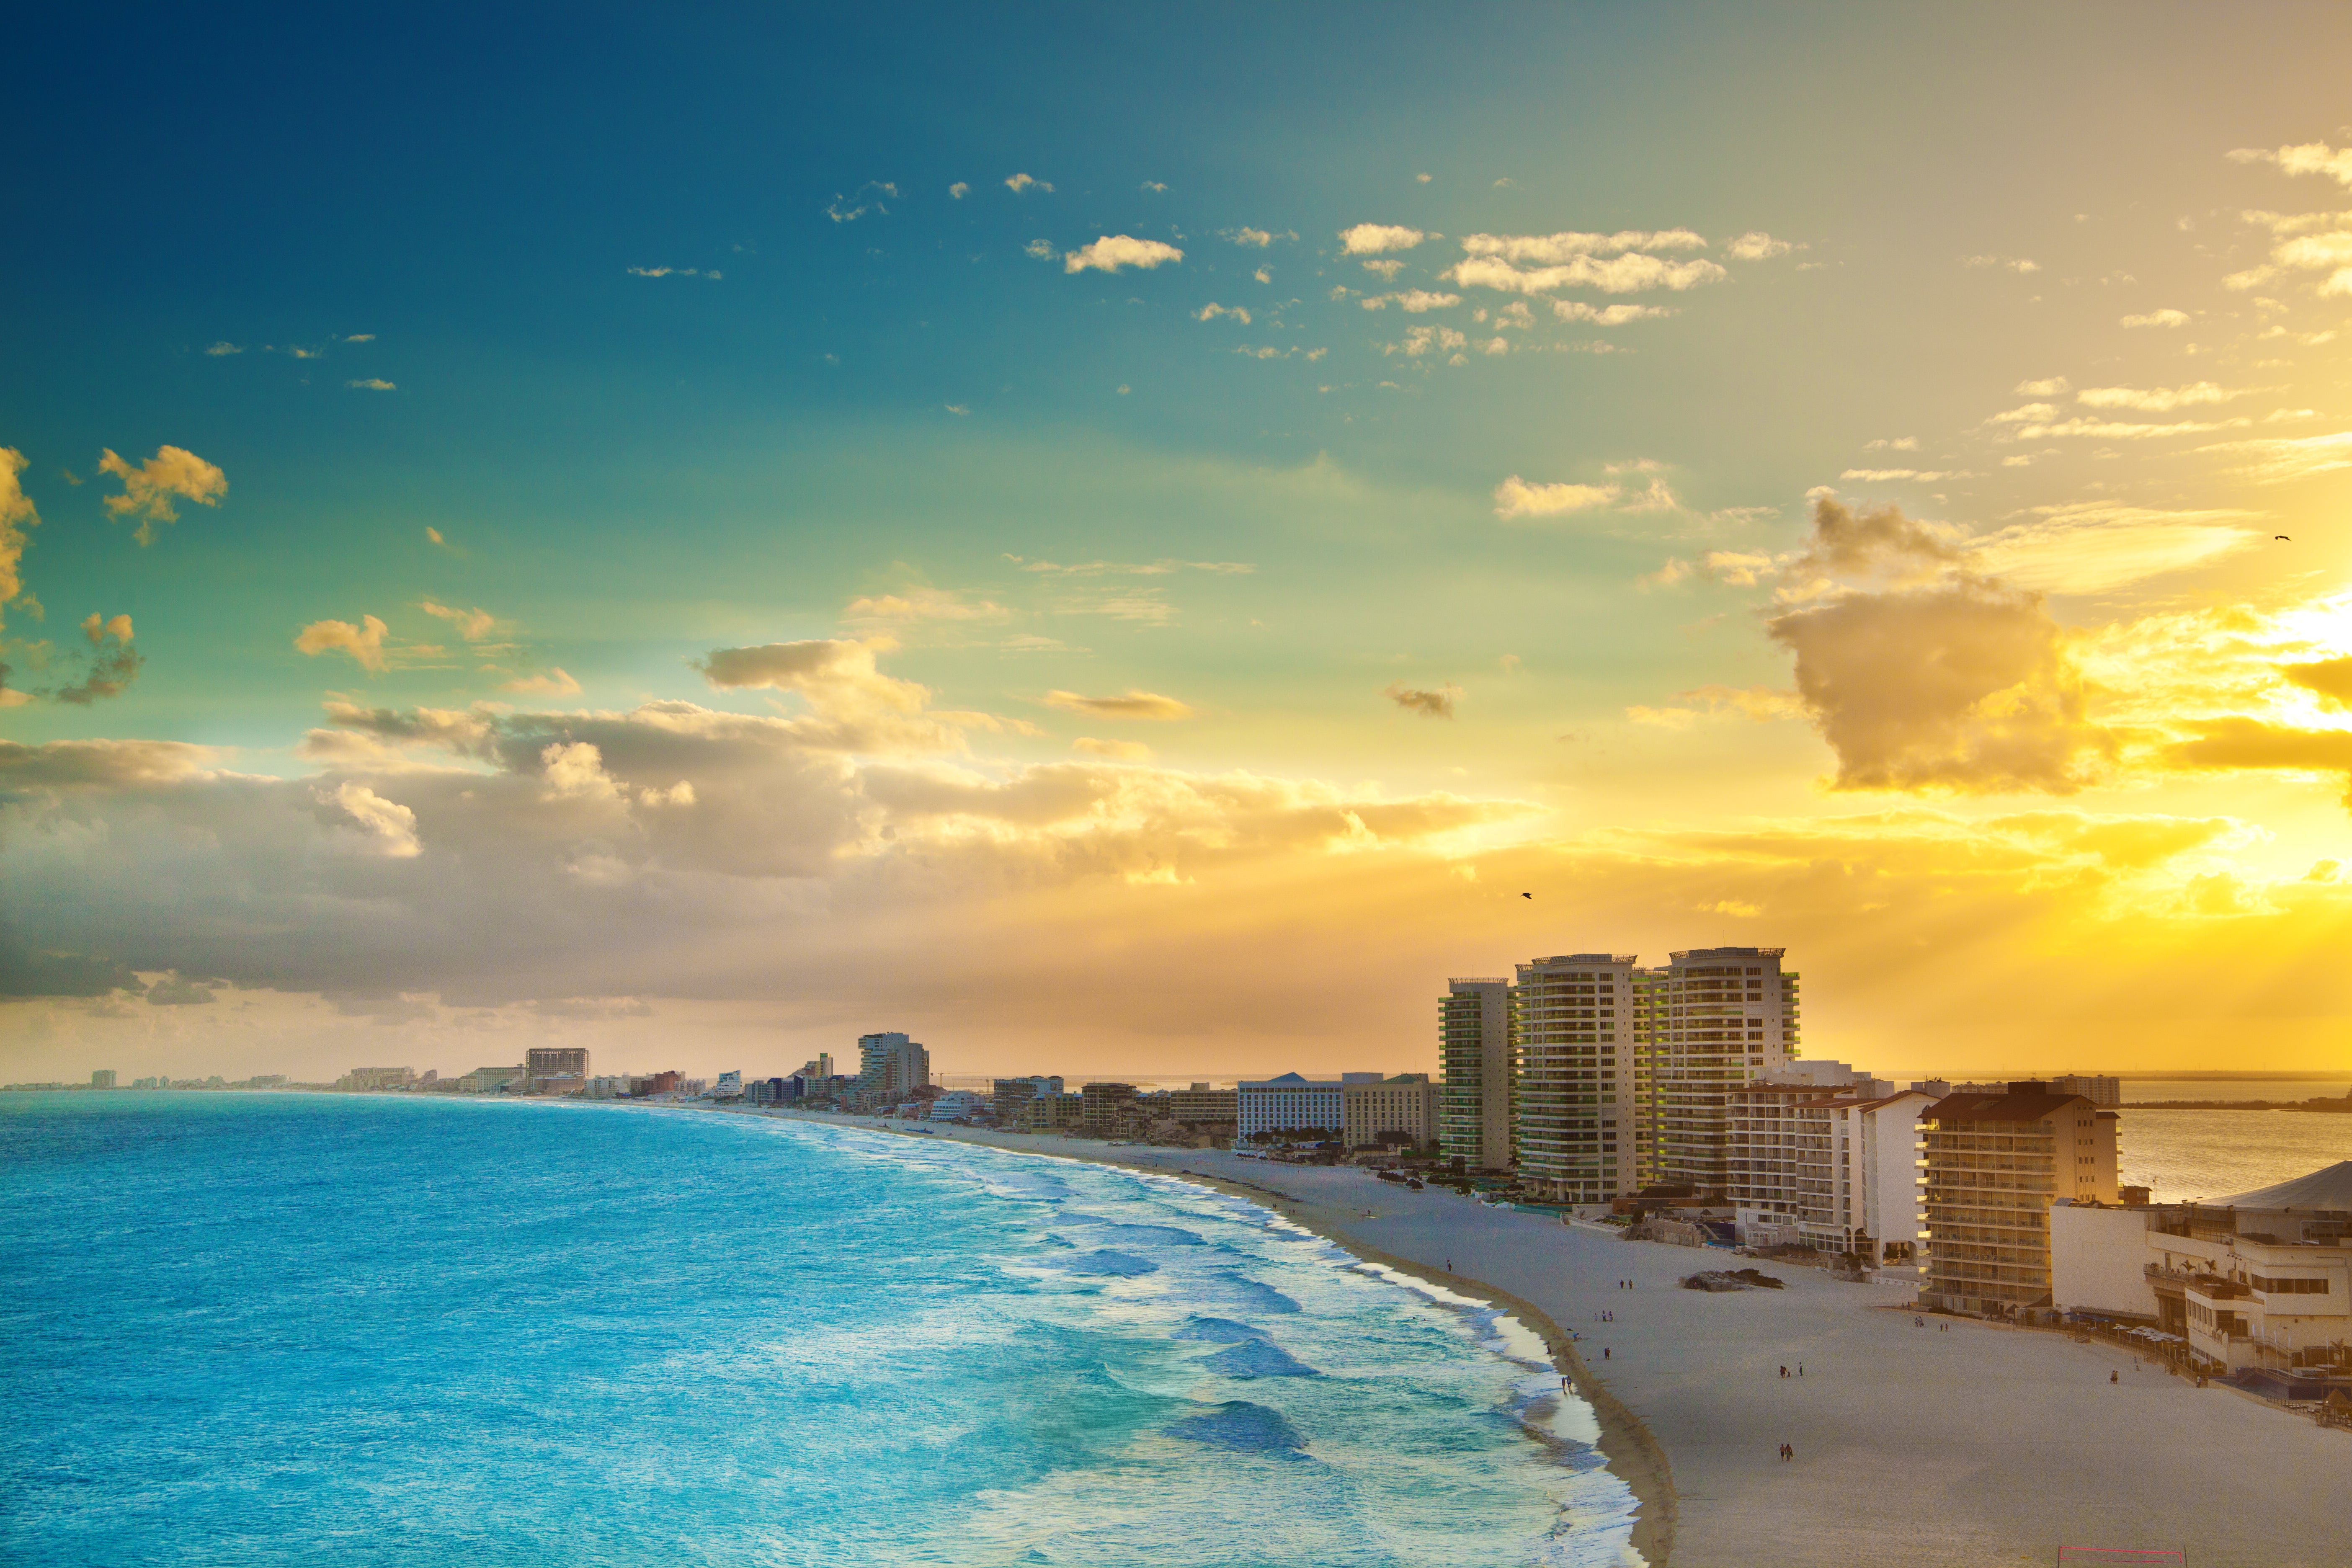 Mexico beach deals: Fly to Cancun, Guadalajara, San Jose del Cabo from $222